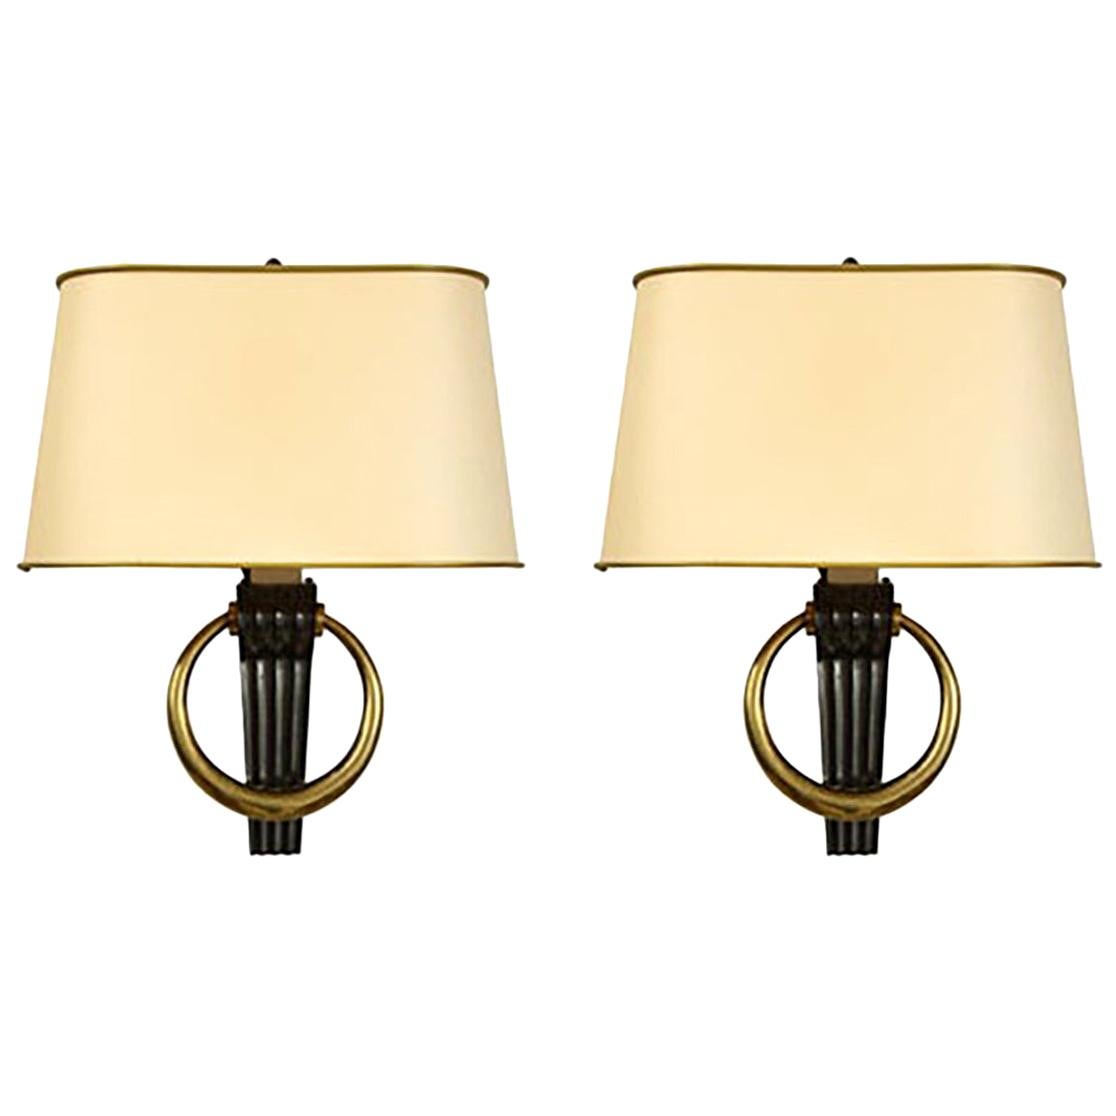 Pair of Custom Bronze Sconces in the French 1940s Manner